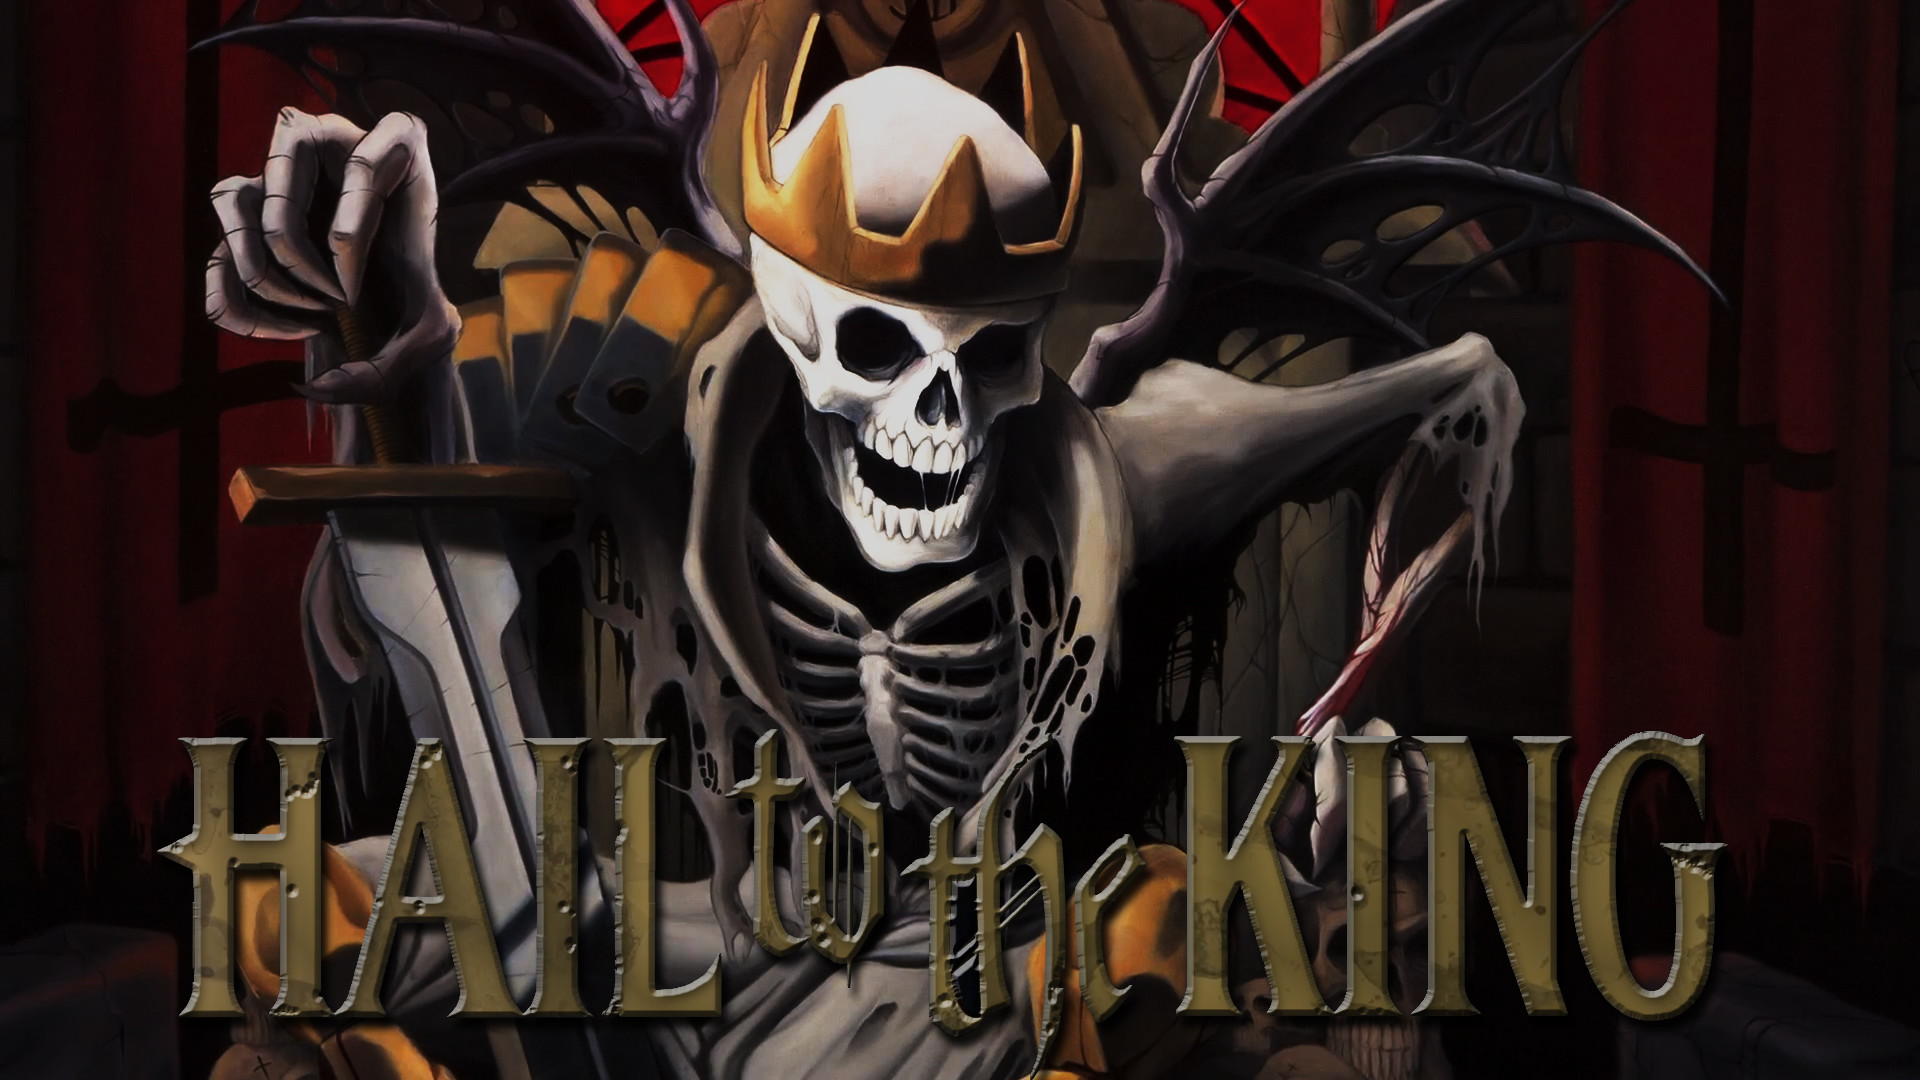 Hail To The King - Avenged Sevenfold Hail To The King , HD Wallpaper & Backgrounds